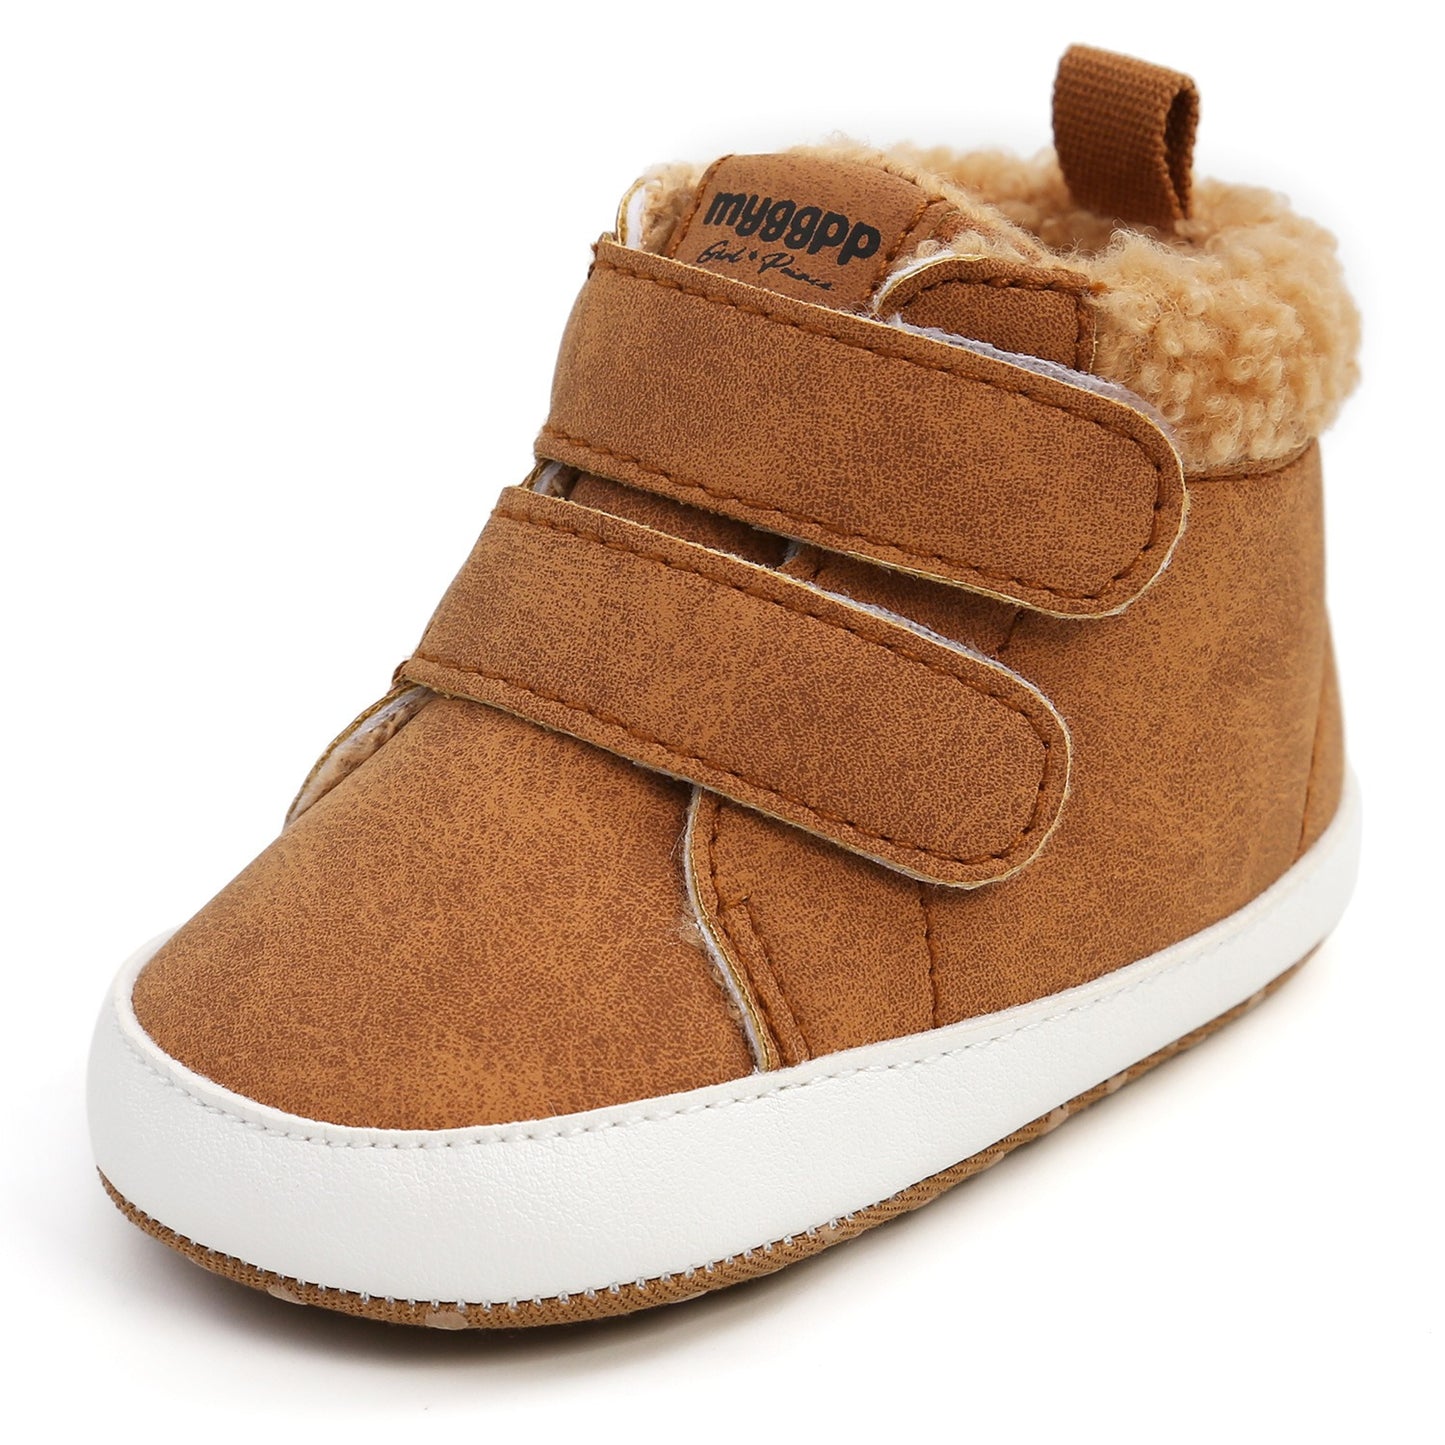 High Top Autumn And Winter Baby Shoes Baby Shoes Walking Shoes Warm Shoes M2035